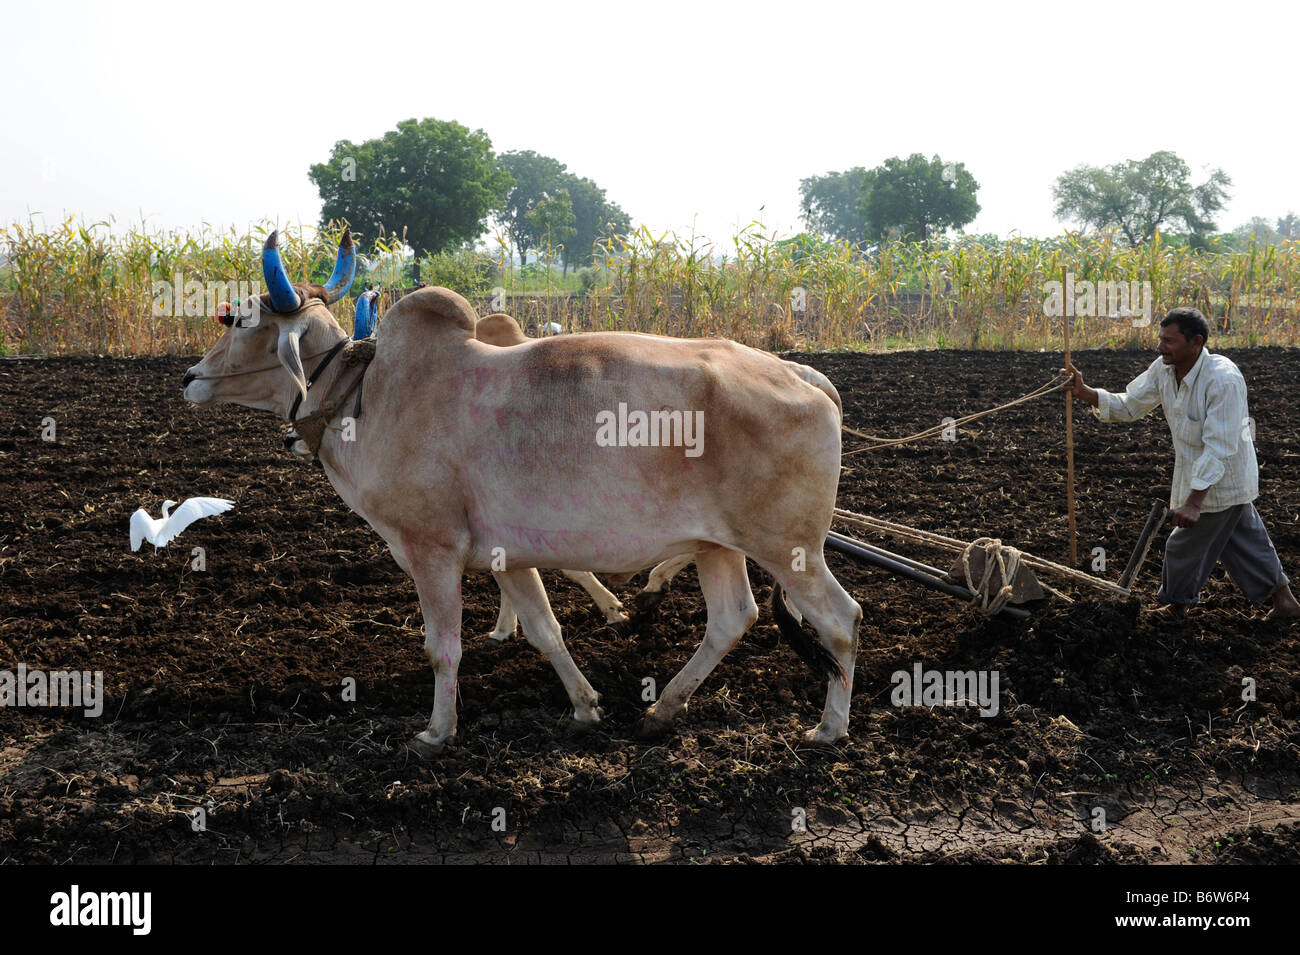 INDIA, M.P. Khargone , fair trade and organic cotton farming, farmer plow cotton field with ox, arable land Stock Photo